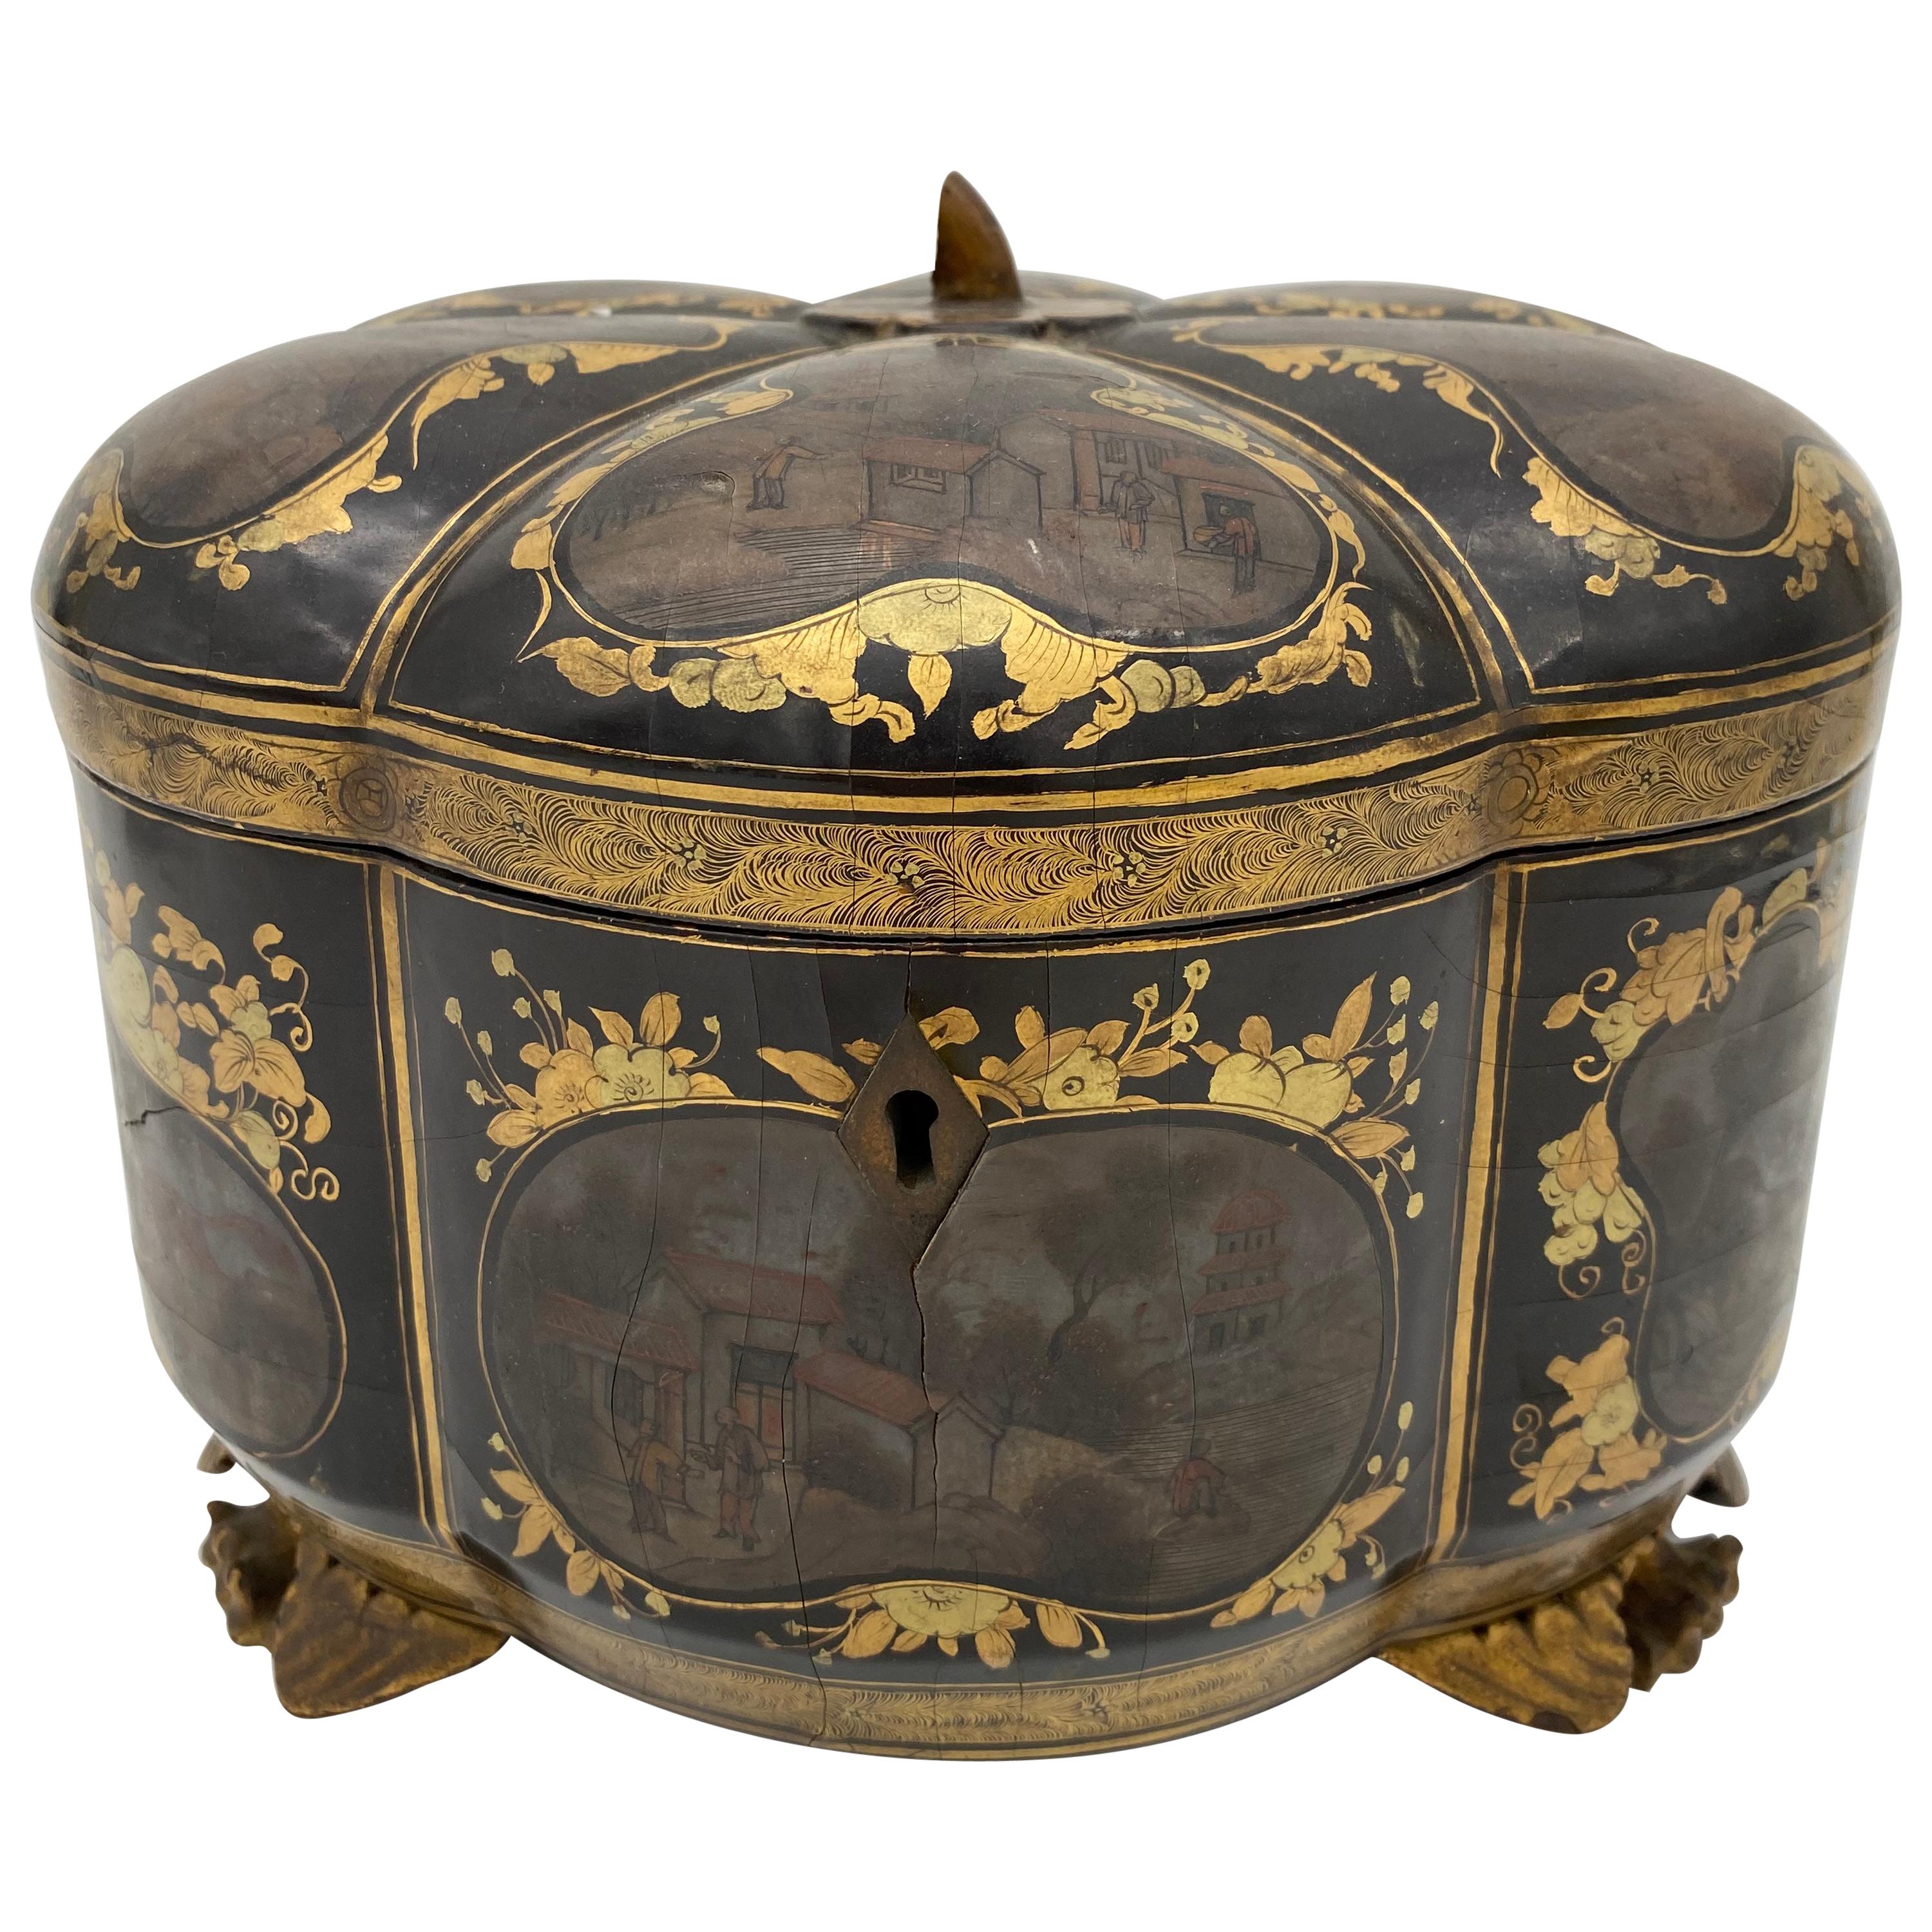 19th Century a Unique Gilt Chinese Lacquer Tea Caddy